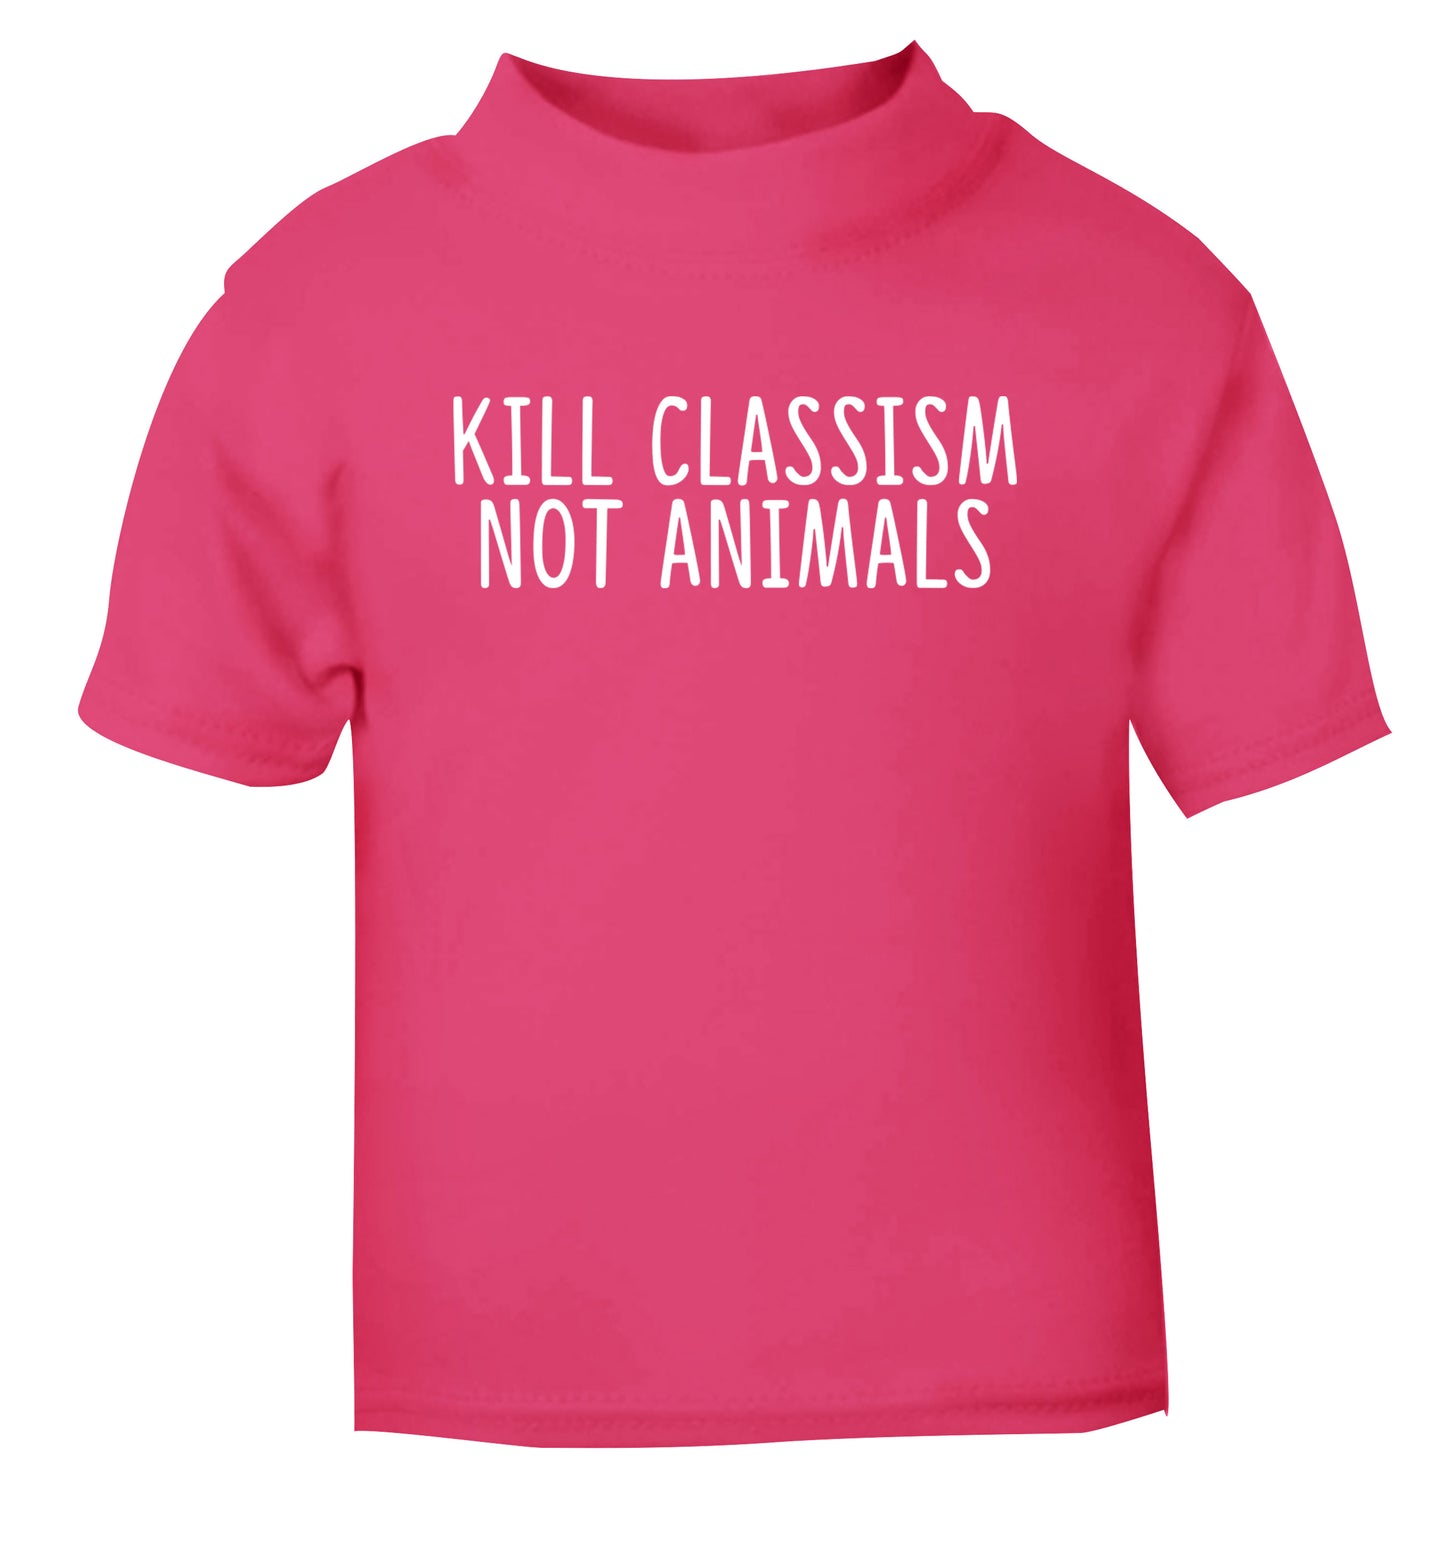 Kill Classism Not Animals pink Baby Toddler Tshirt 2 Years